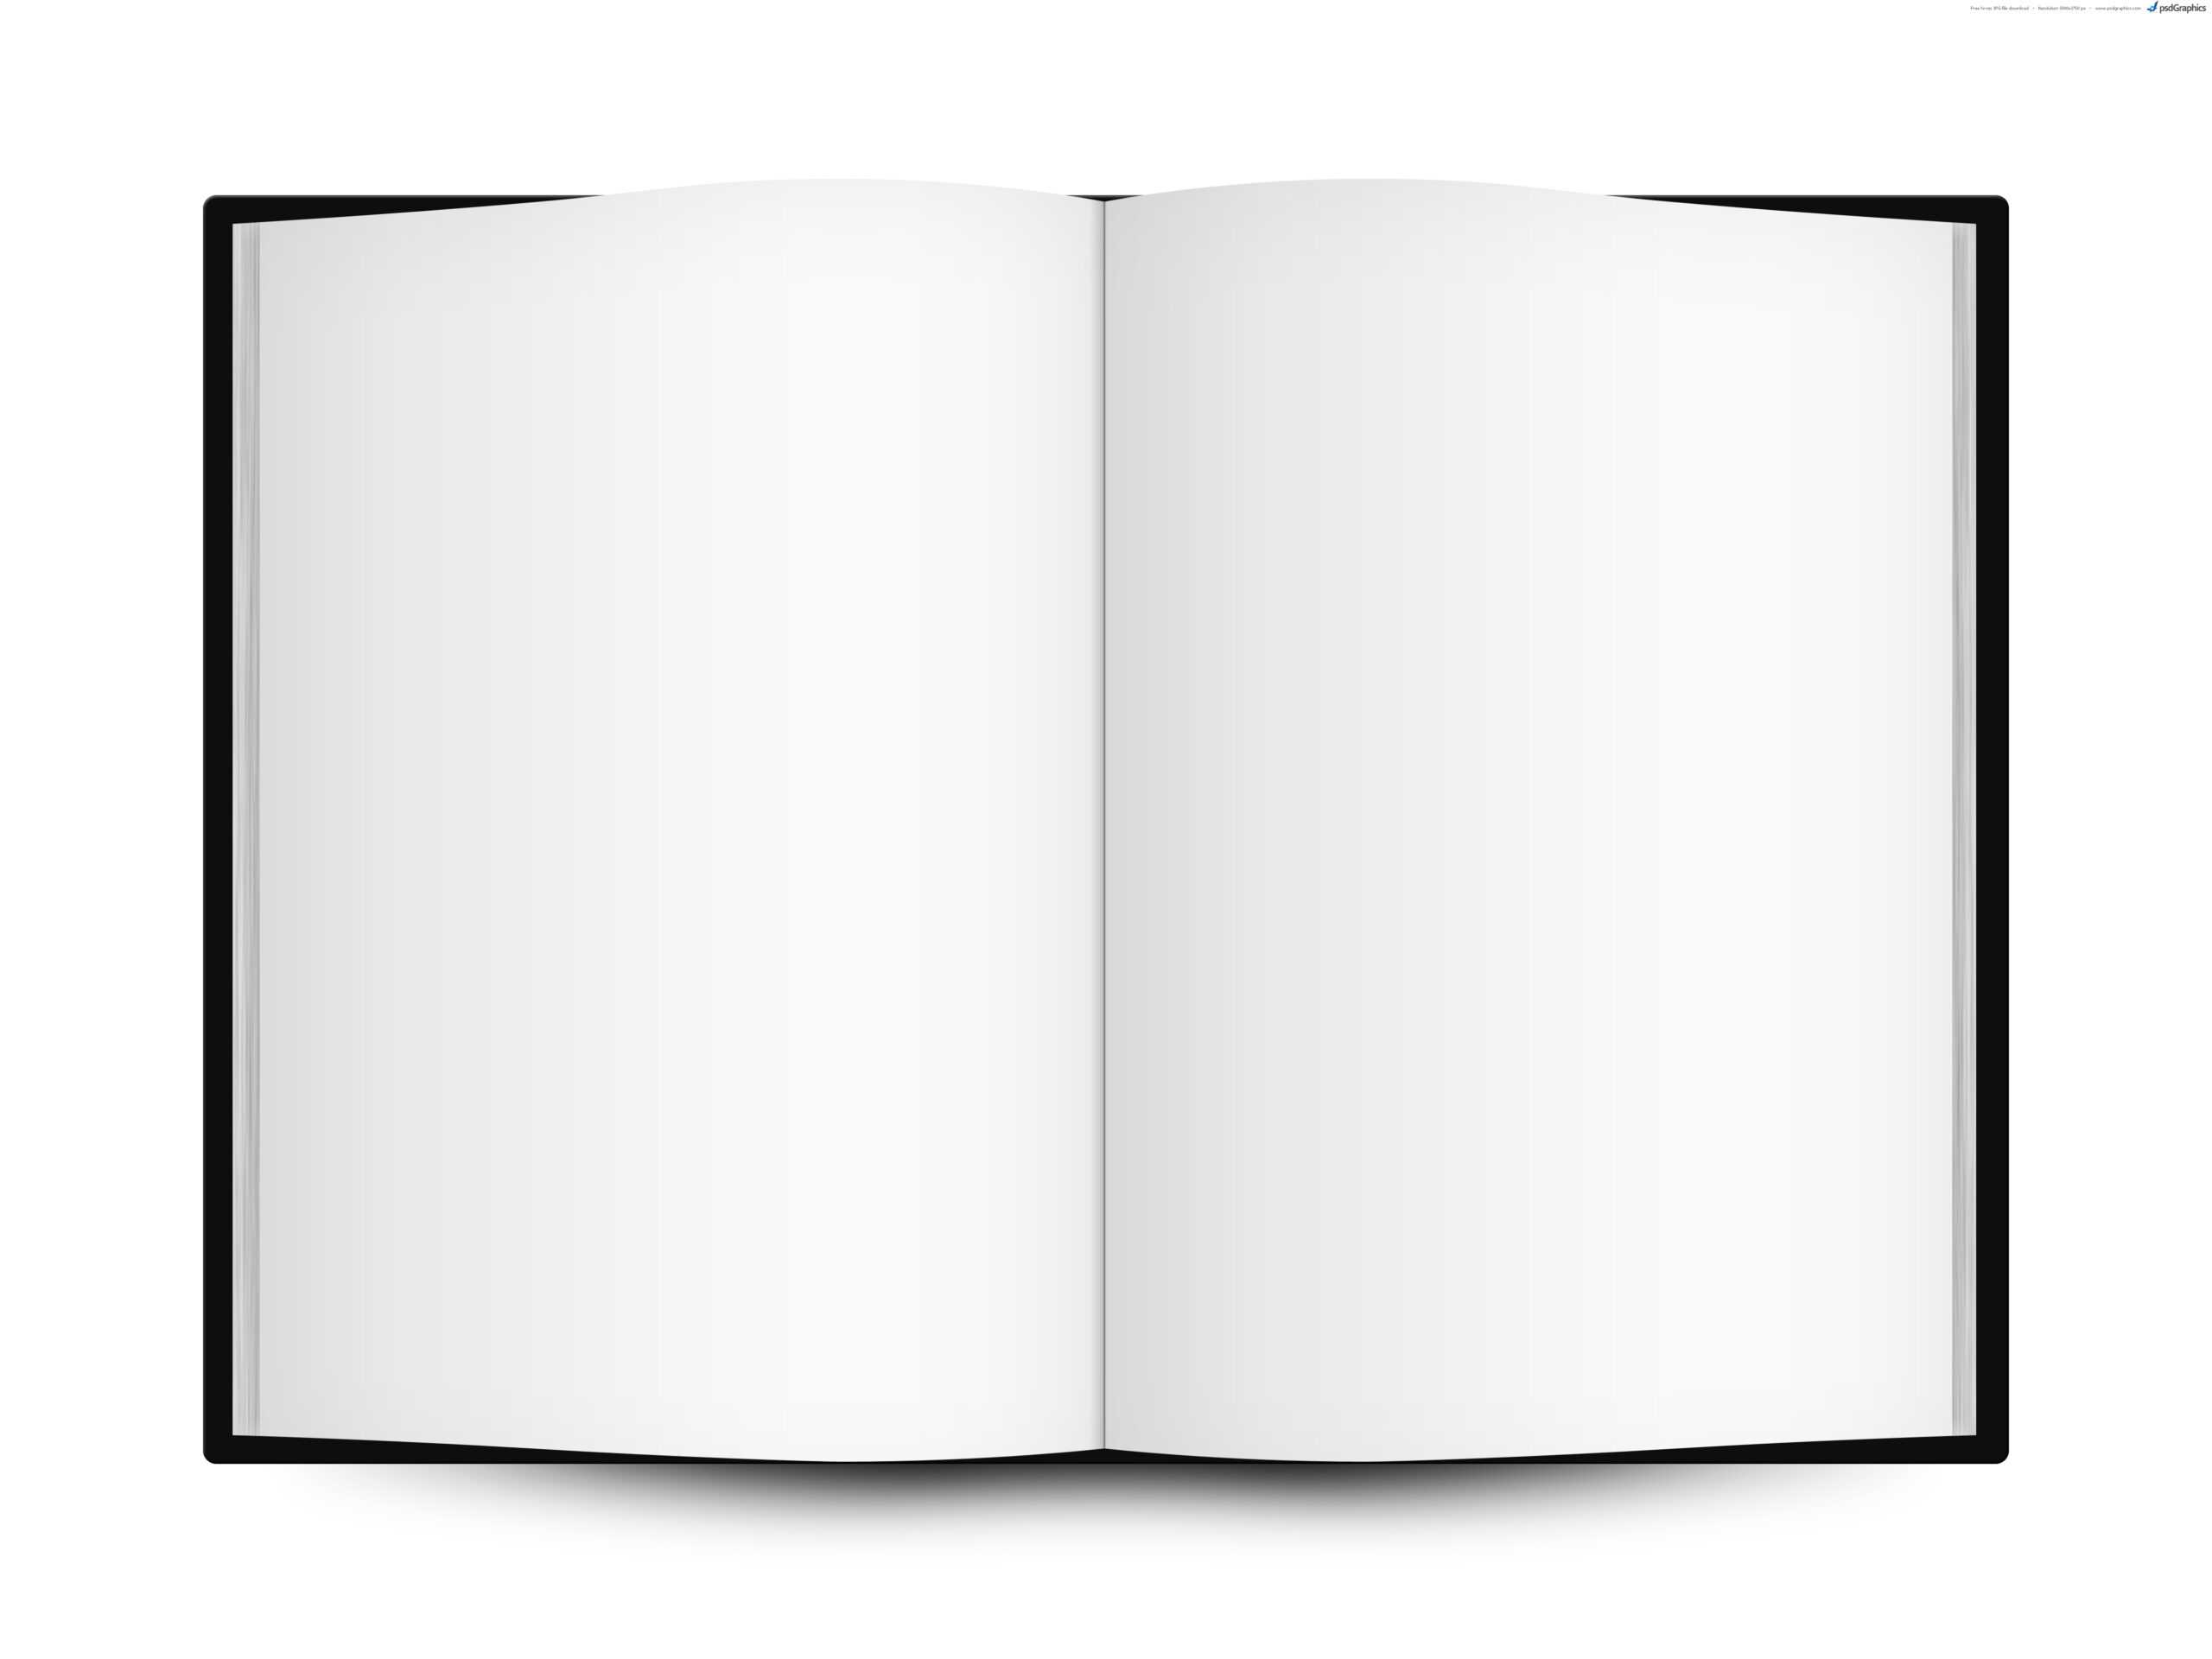 Blank Open Book Template | Psdgraphics With Regard To Blank Magazine Template Psd